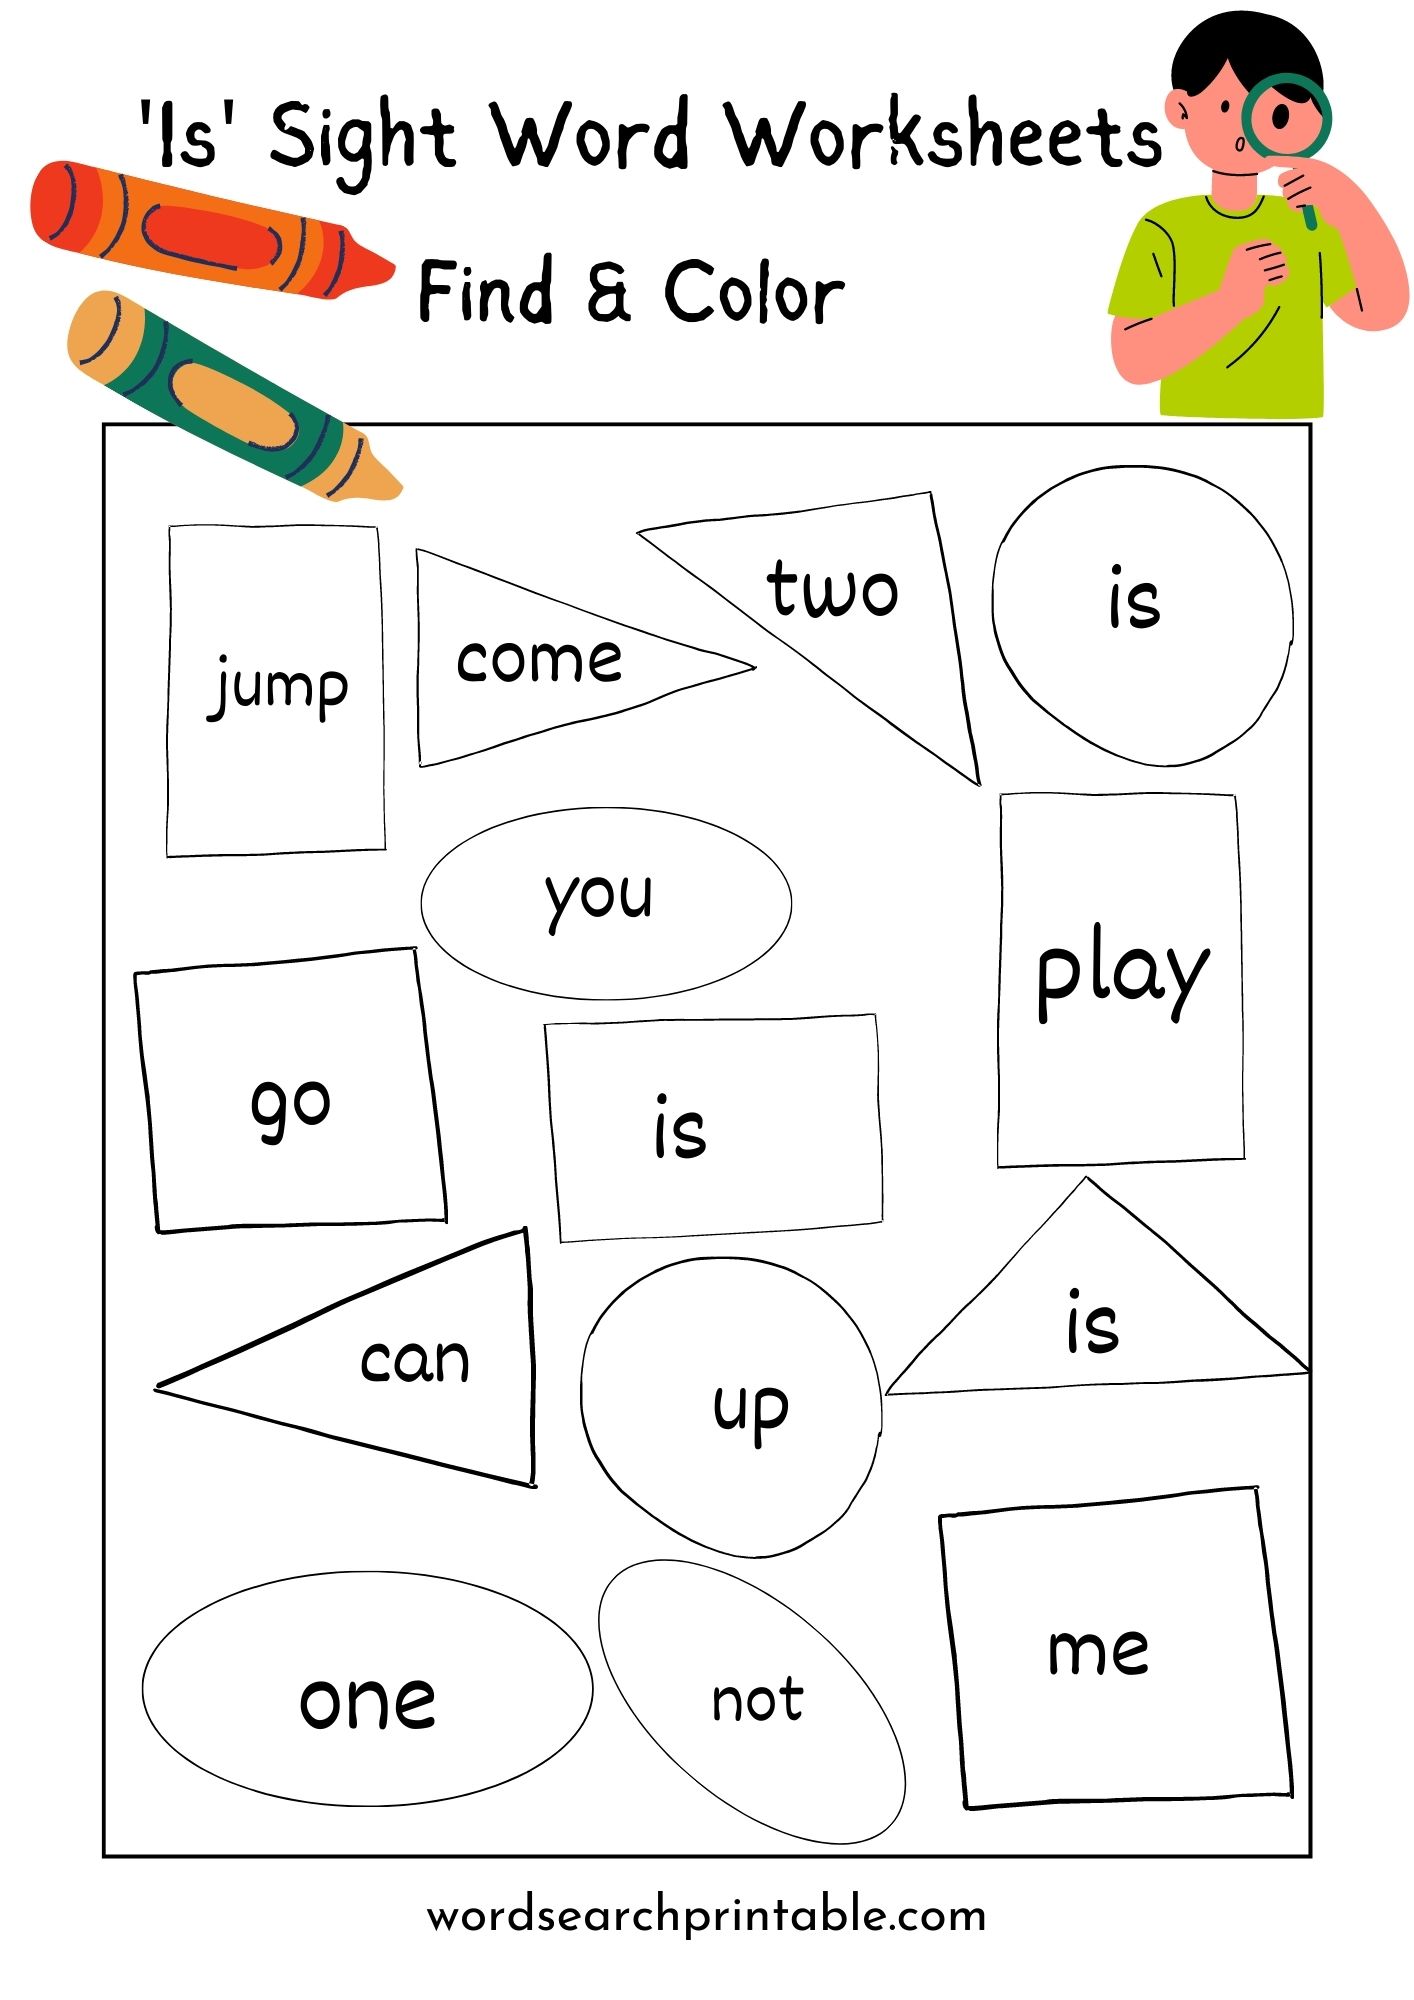 Find the sight word Is and Color the geometric shape